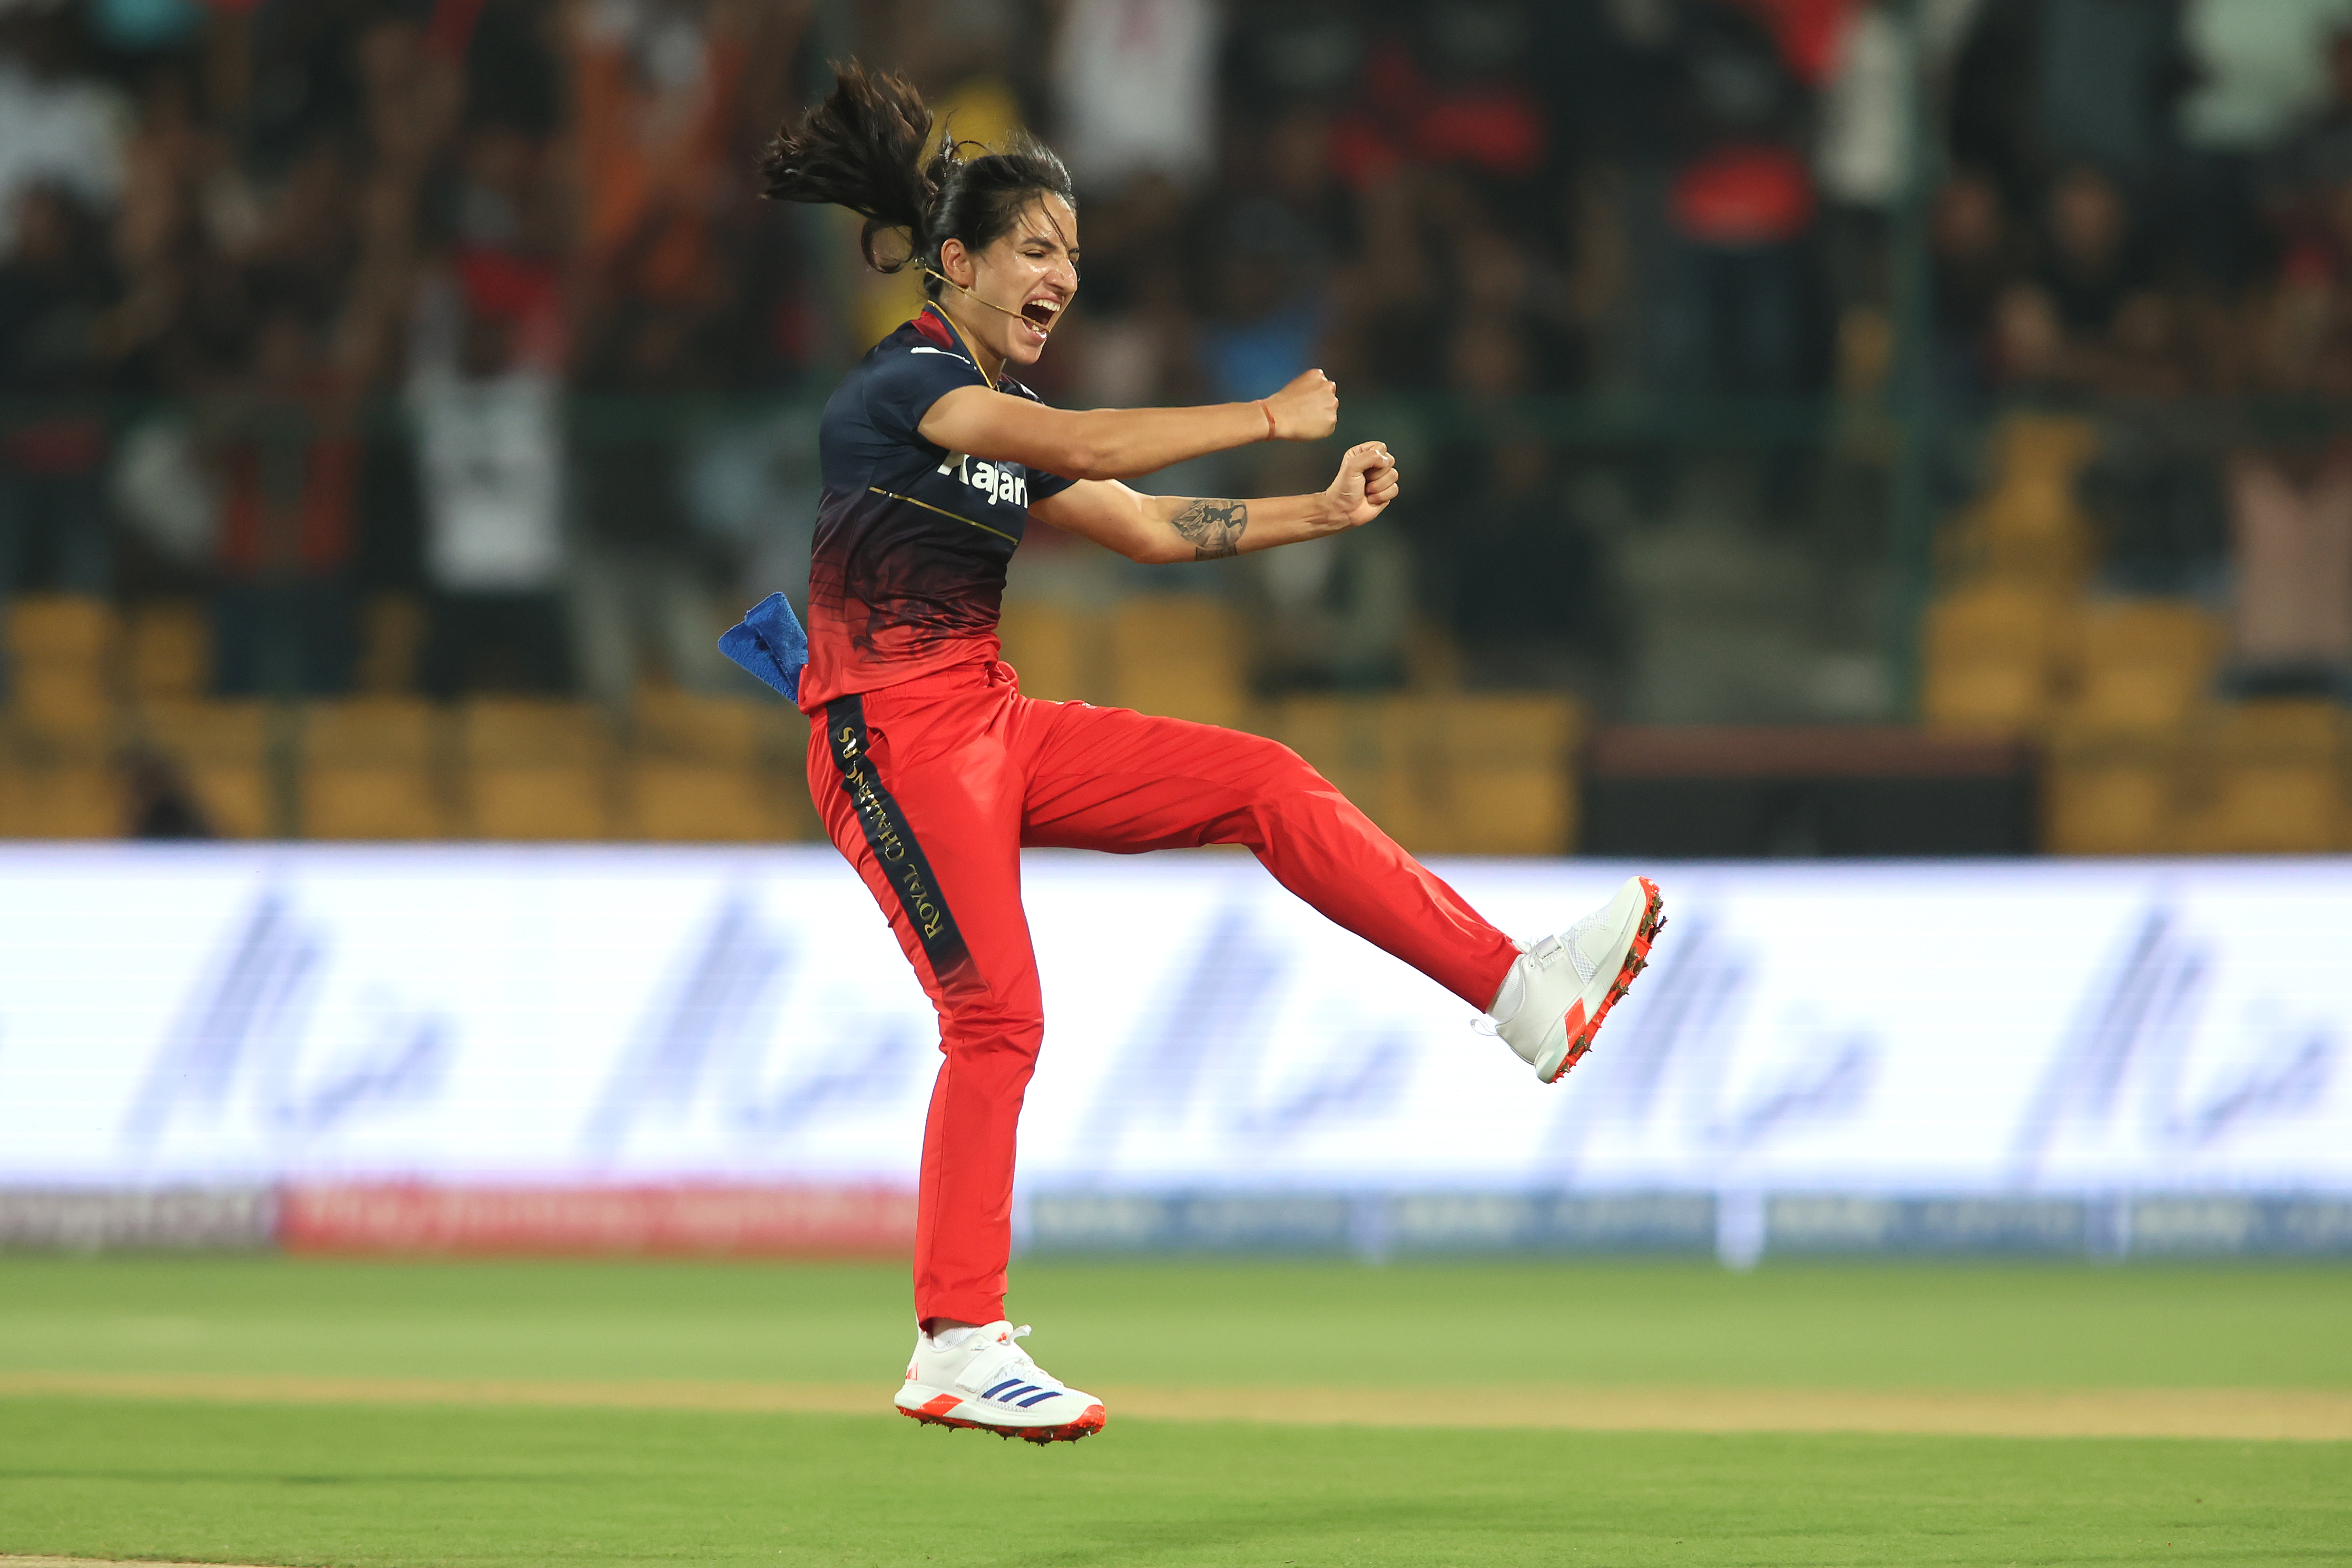 RCB-W won the natch by 8 wickets